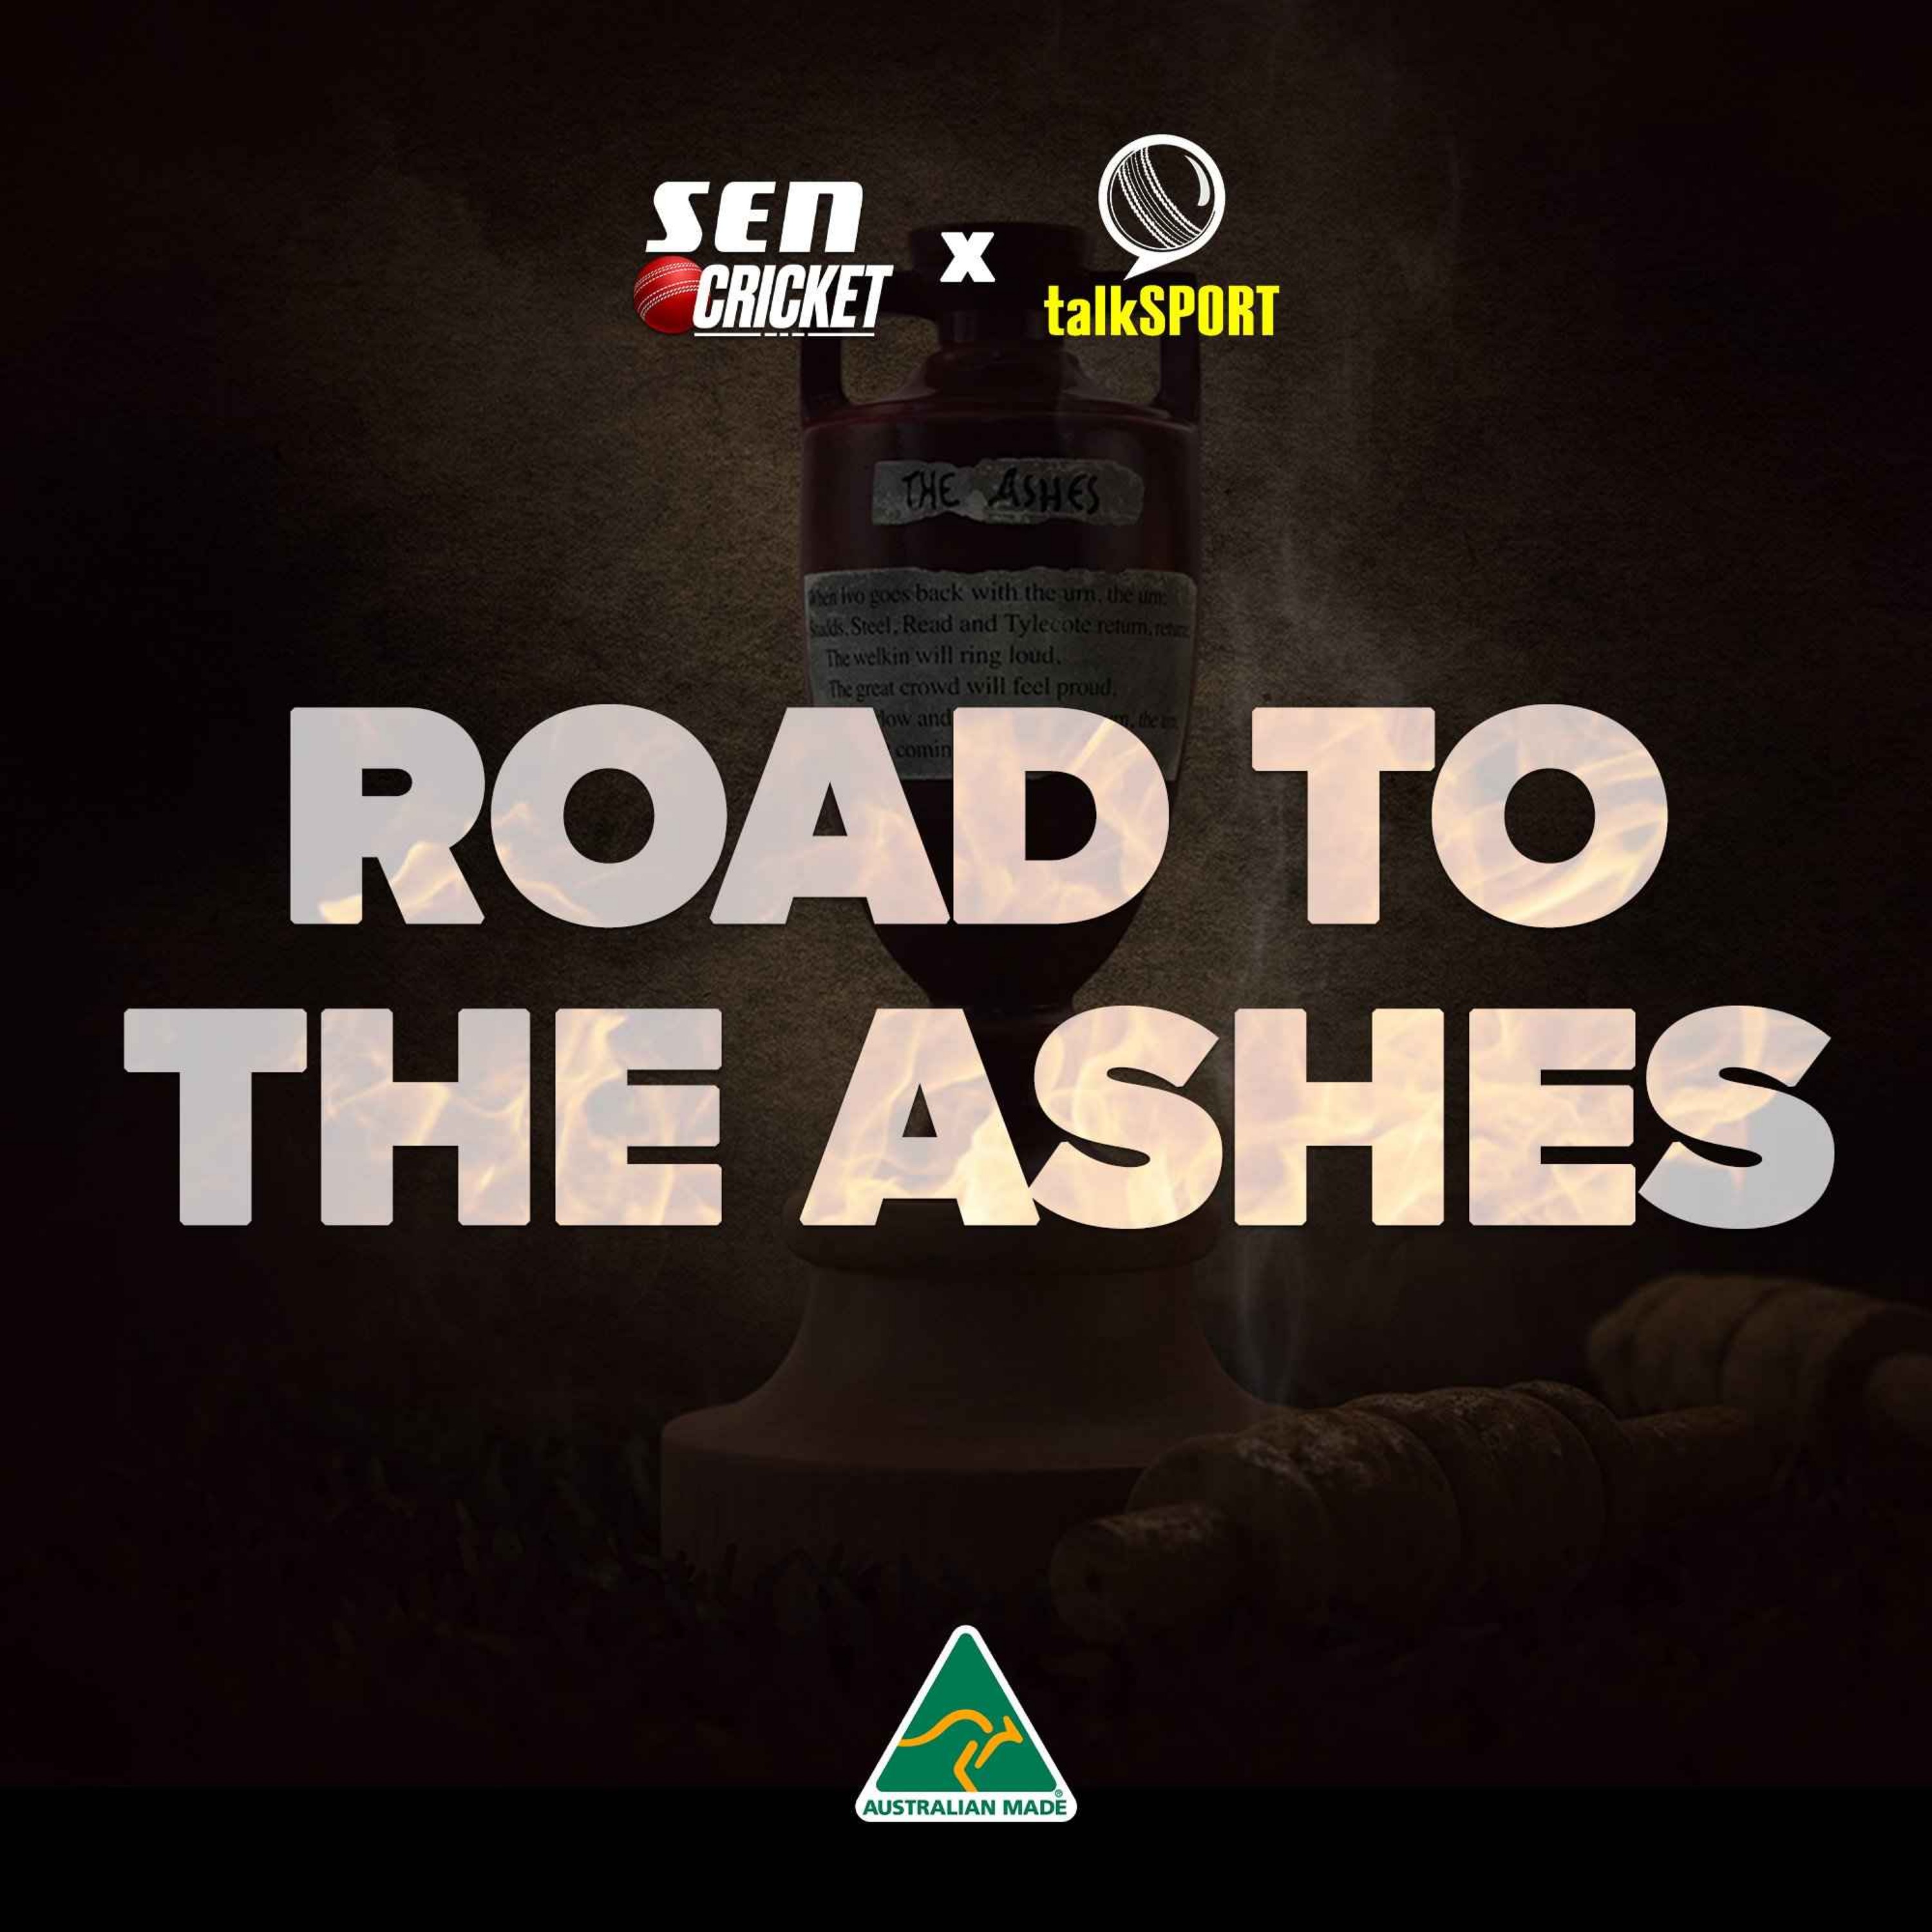 Road To The Ashes EP8: Our Bumper Ashes Preview & Chris Rogers' Ashes Memories!